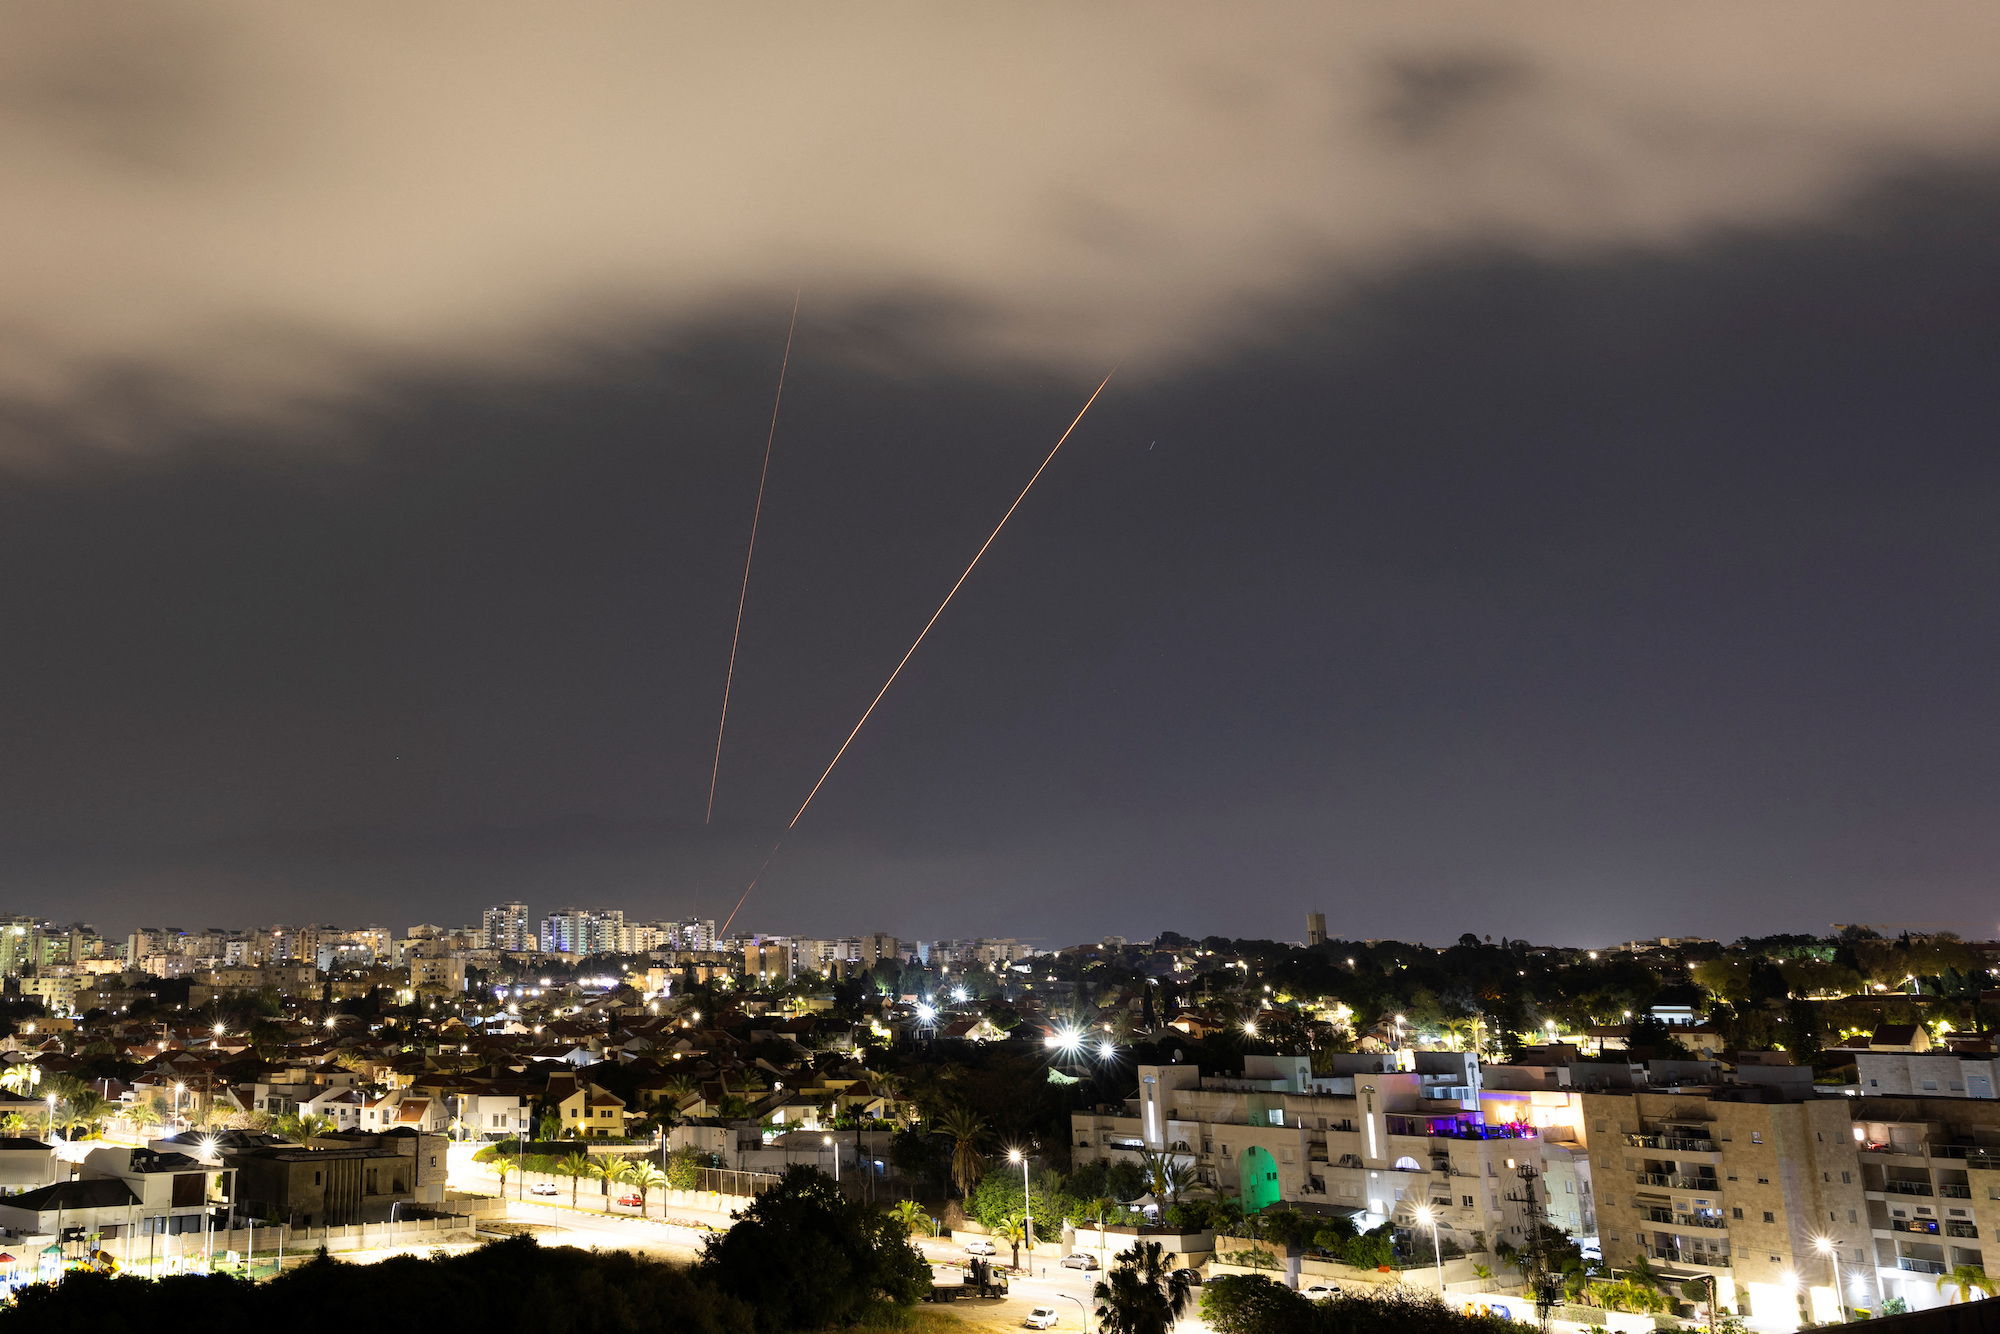 An anti-missile system operates as seen from Ashkelon, Israel, on Sunday.